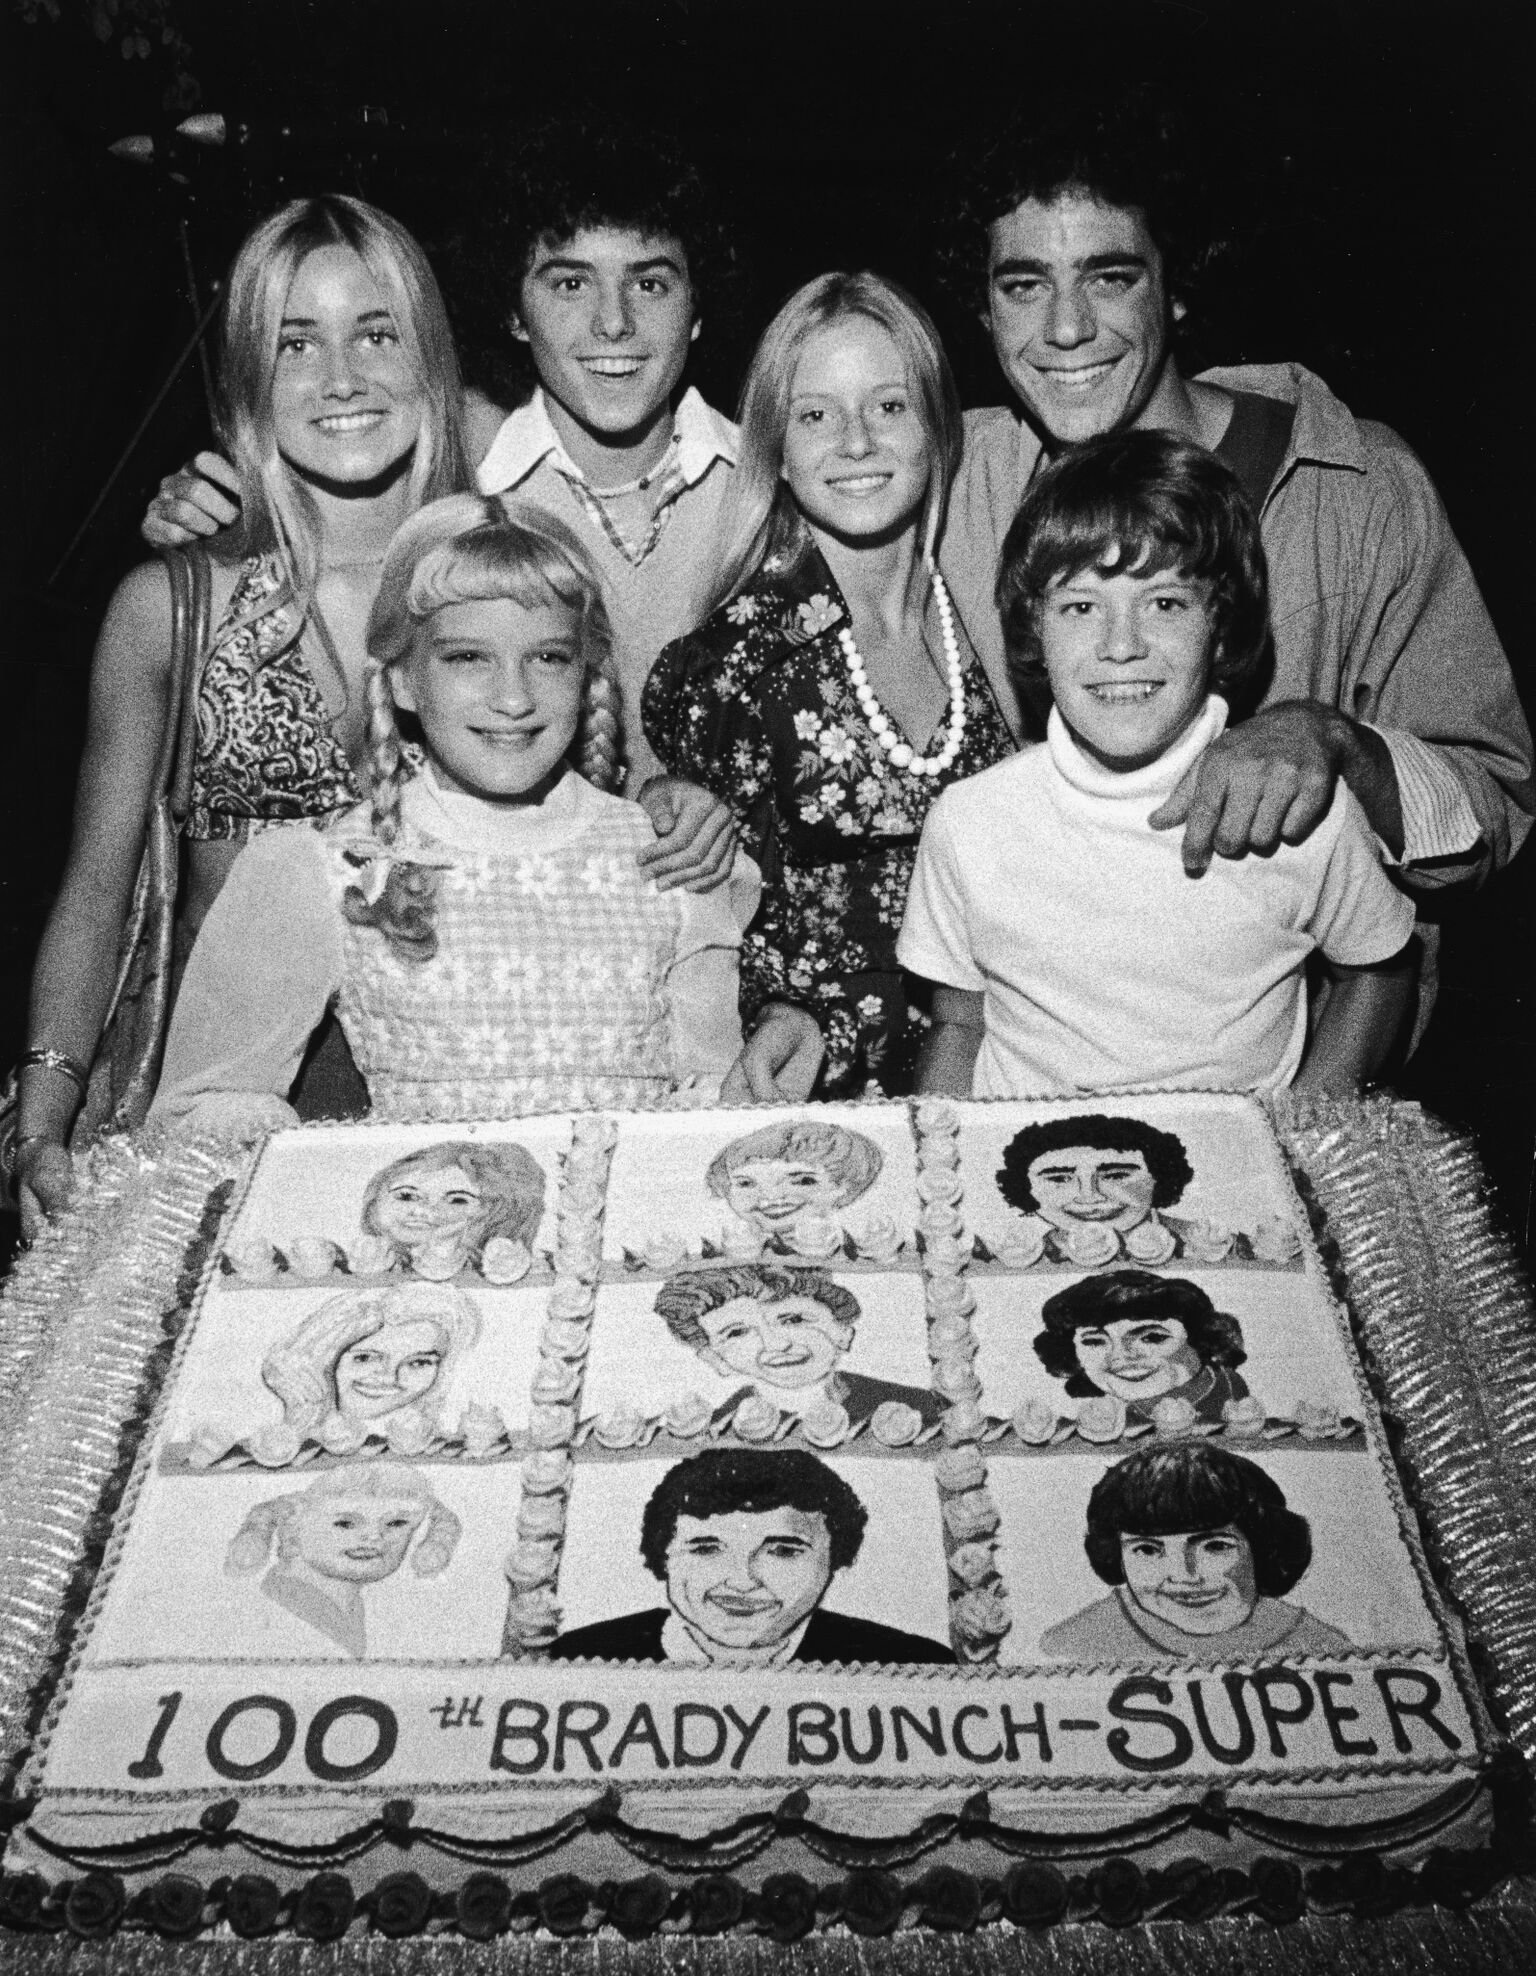 Young cast members of the television series, 'The Brady Bunch' pose with a cake celebrating the show's 100th episode in 1973  | Getty Images